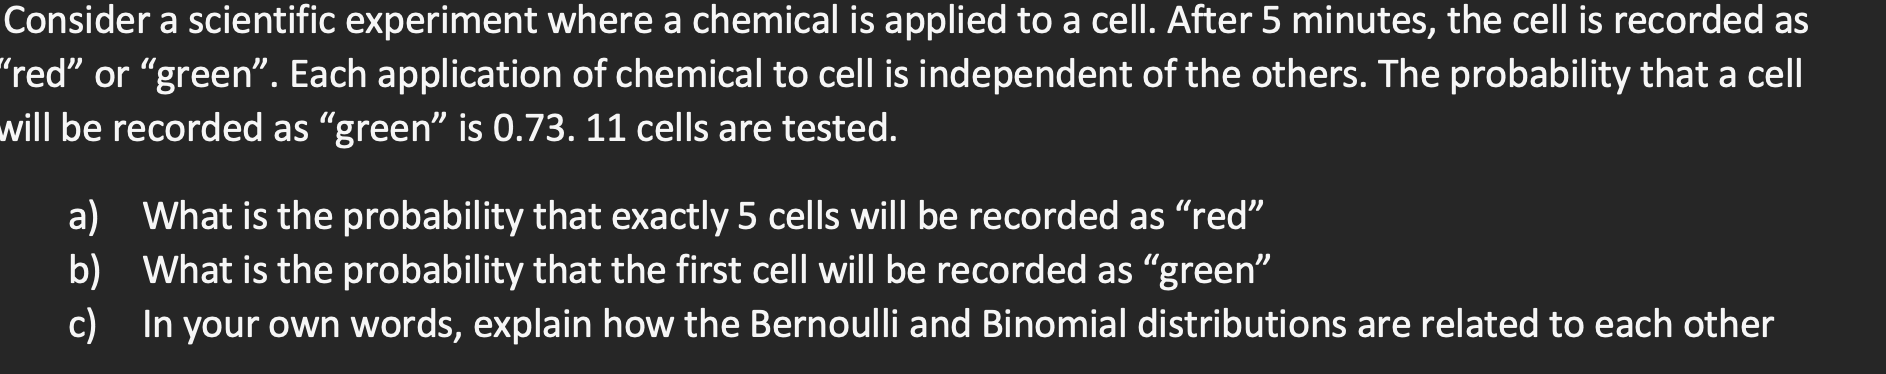 Consider A Scientific Experiment Where A Chemical Is Applied To A Cell After 5 Minutes The Cell Is Recorded As Red O 1